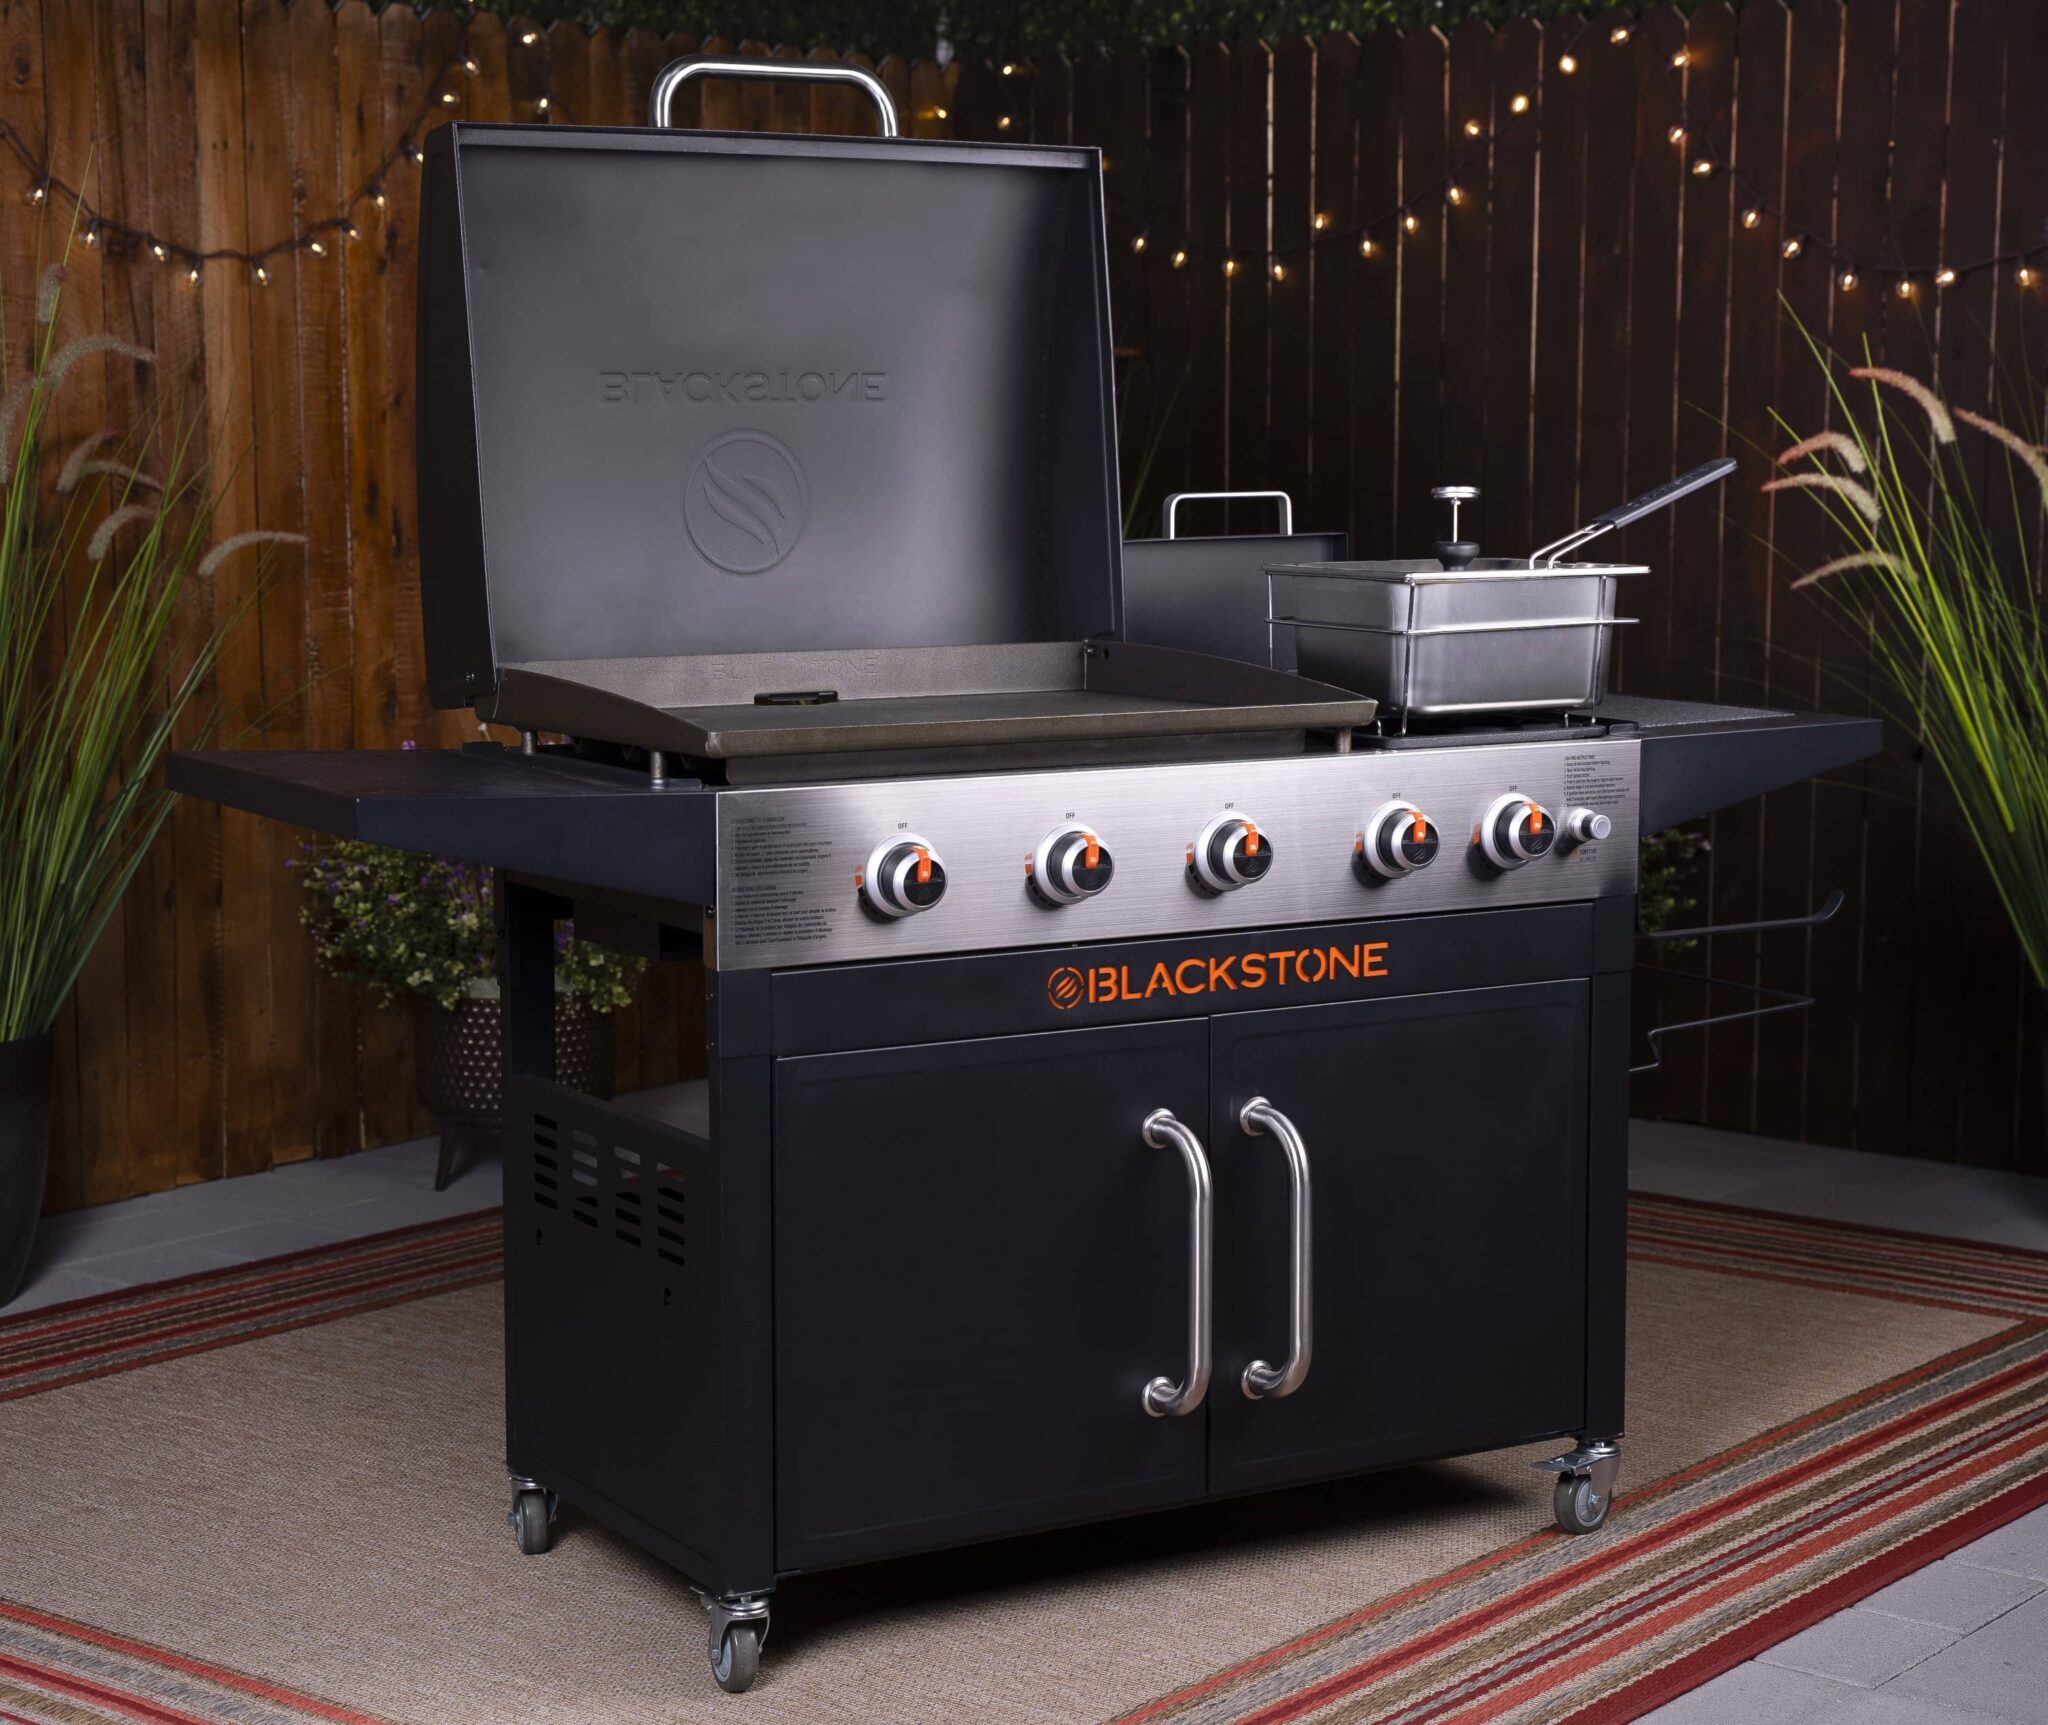 Review of the Blackstone Range Top Combo Griddle Sizzle